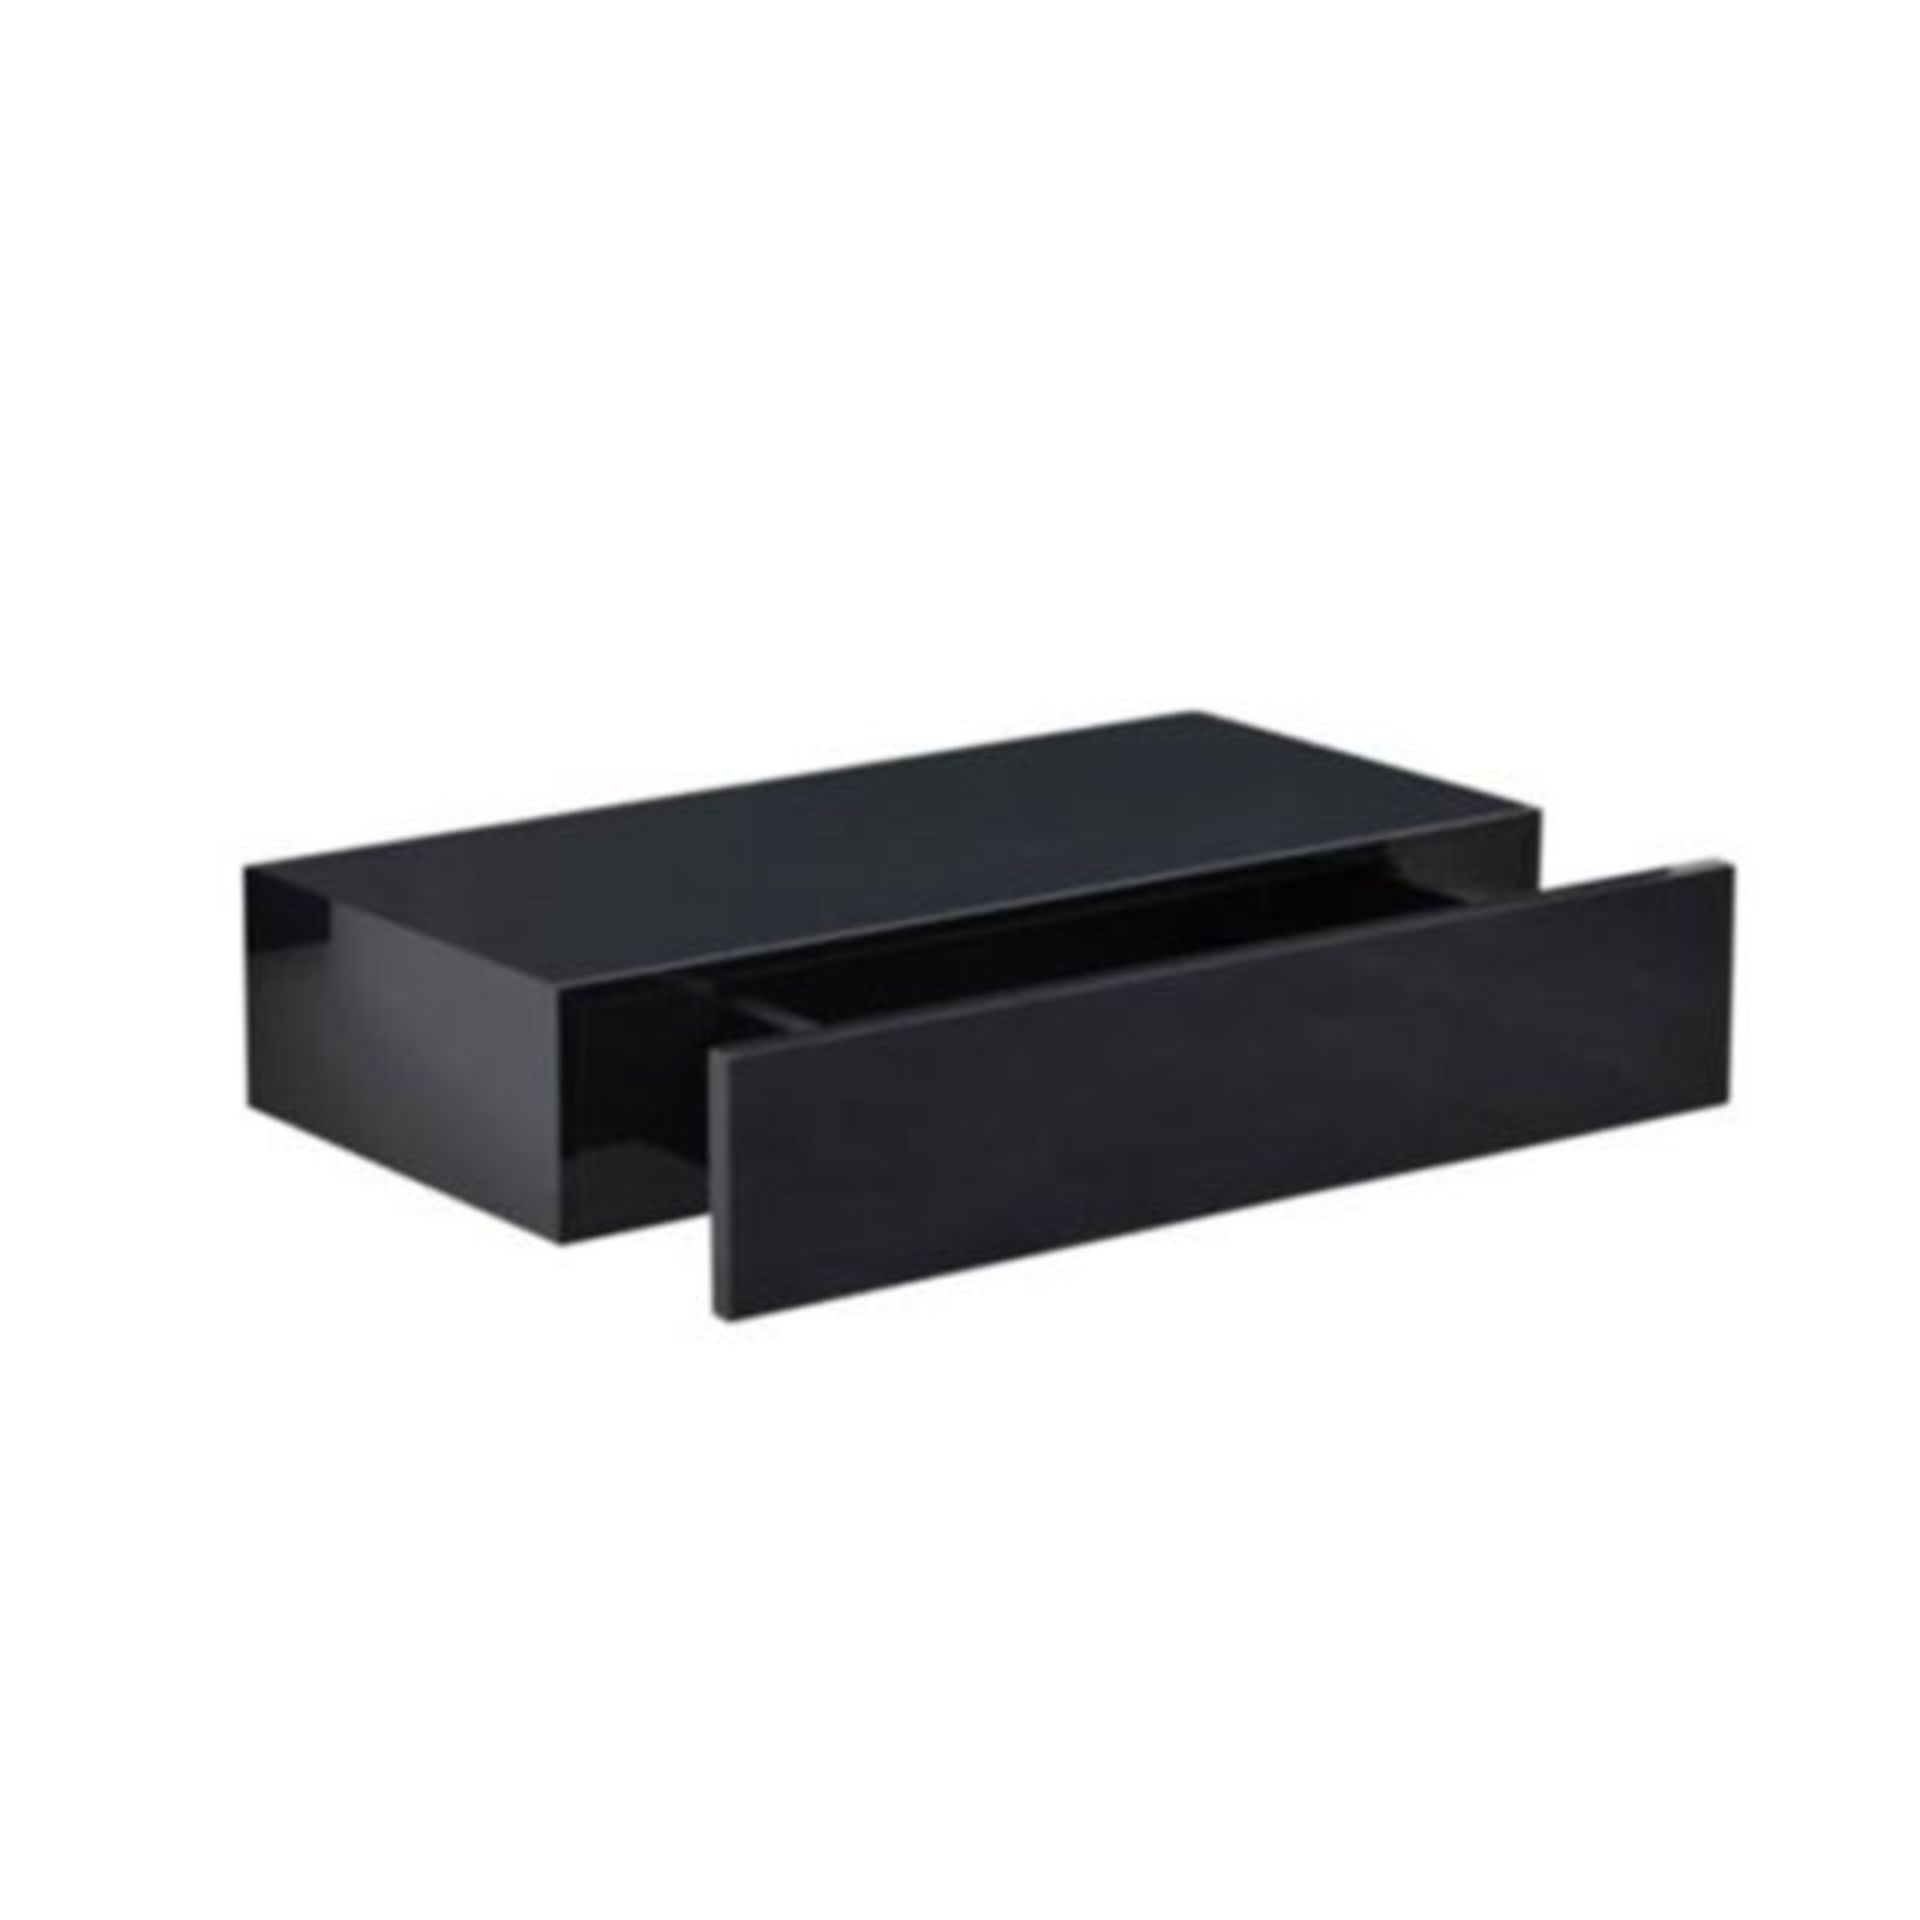 1 AS NEW BOXED FORM FLOATING SHELF WITH DRAWER IN